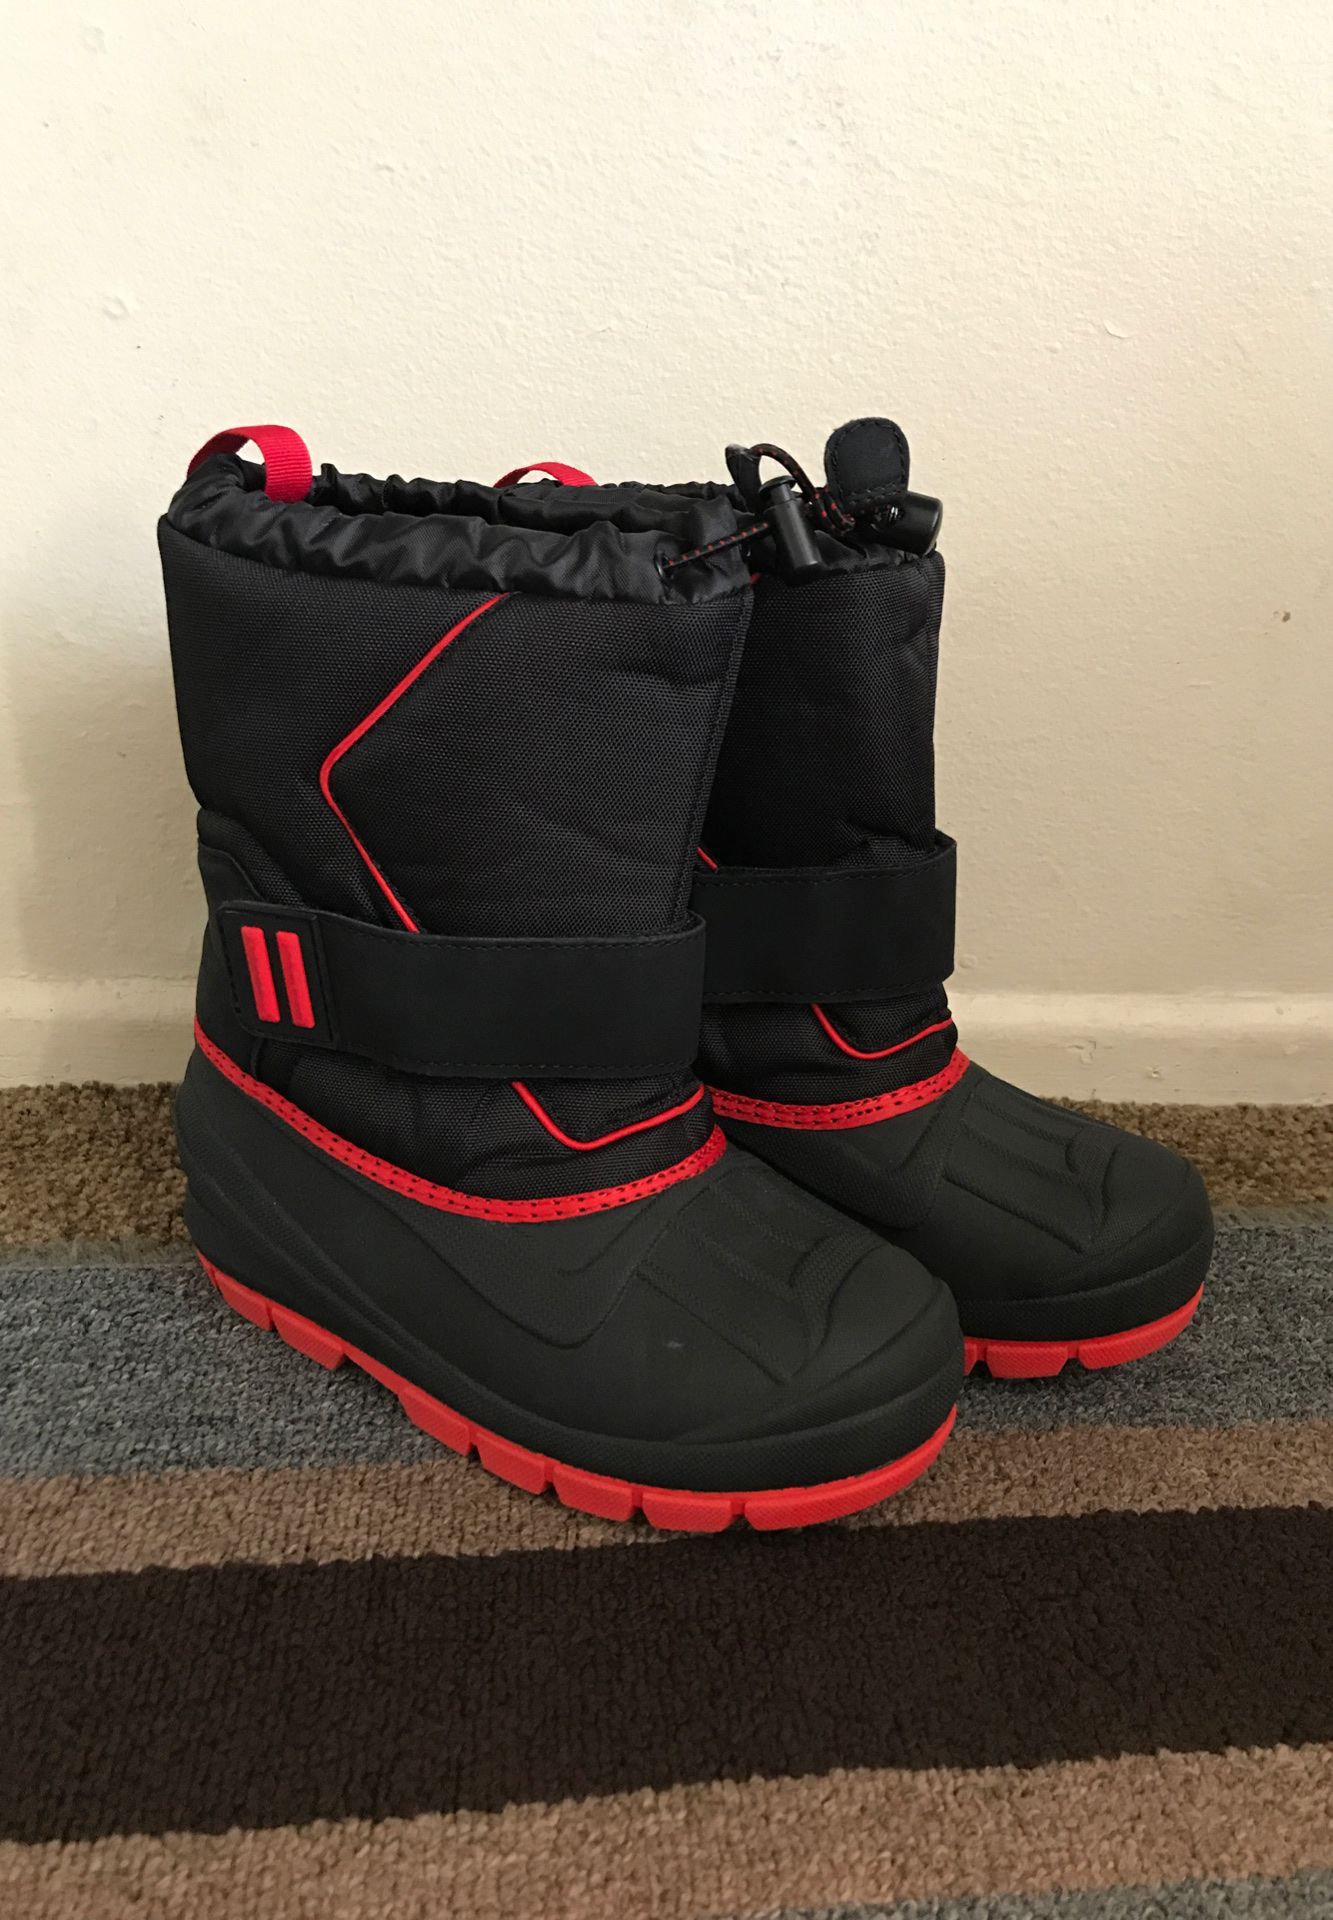 Size 2 kids Snow Boots and Rain Boots Thermolite